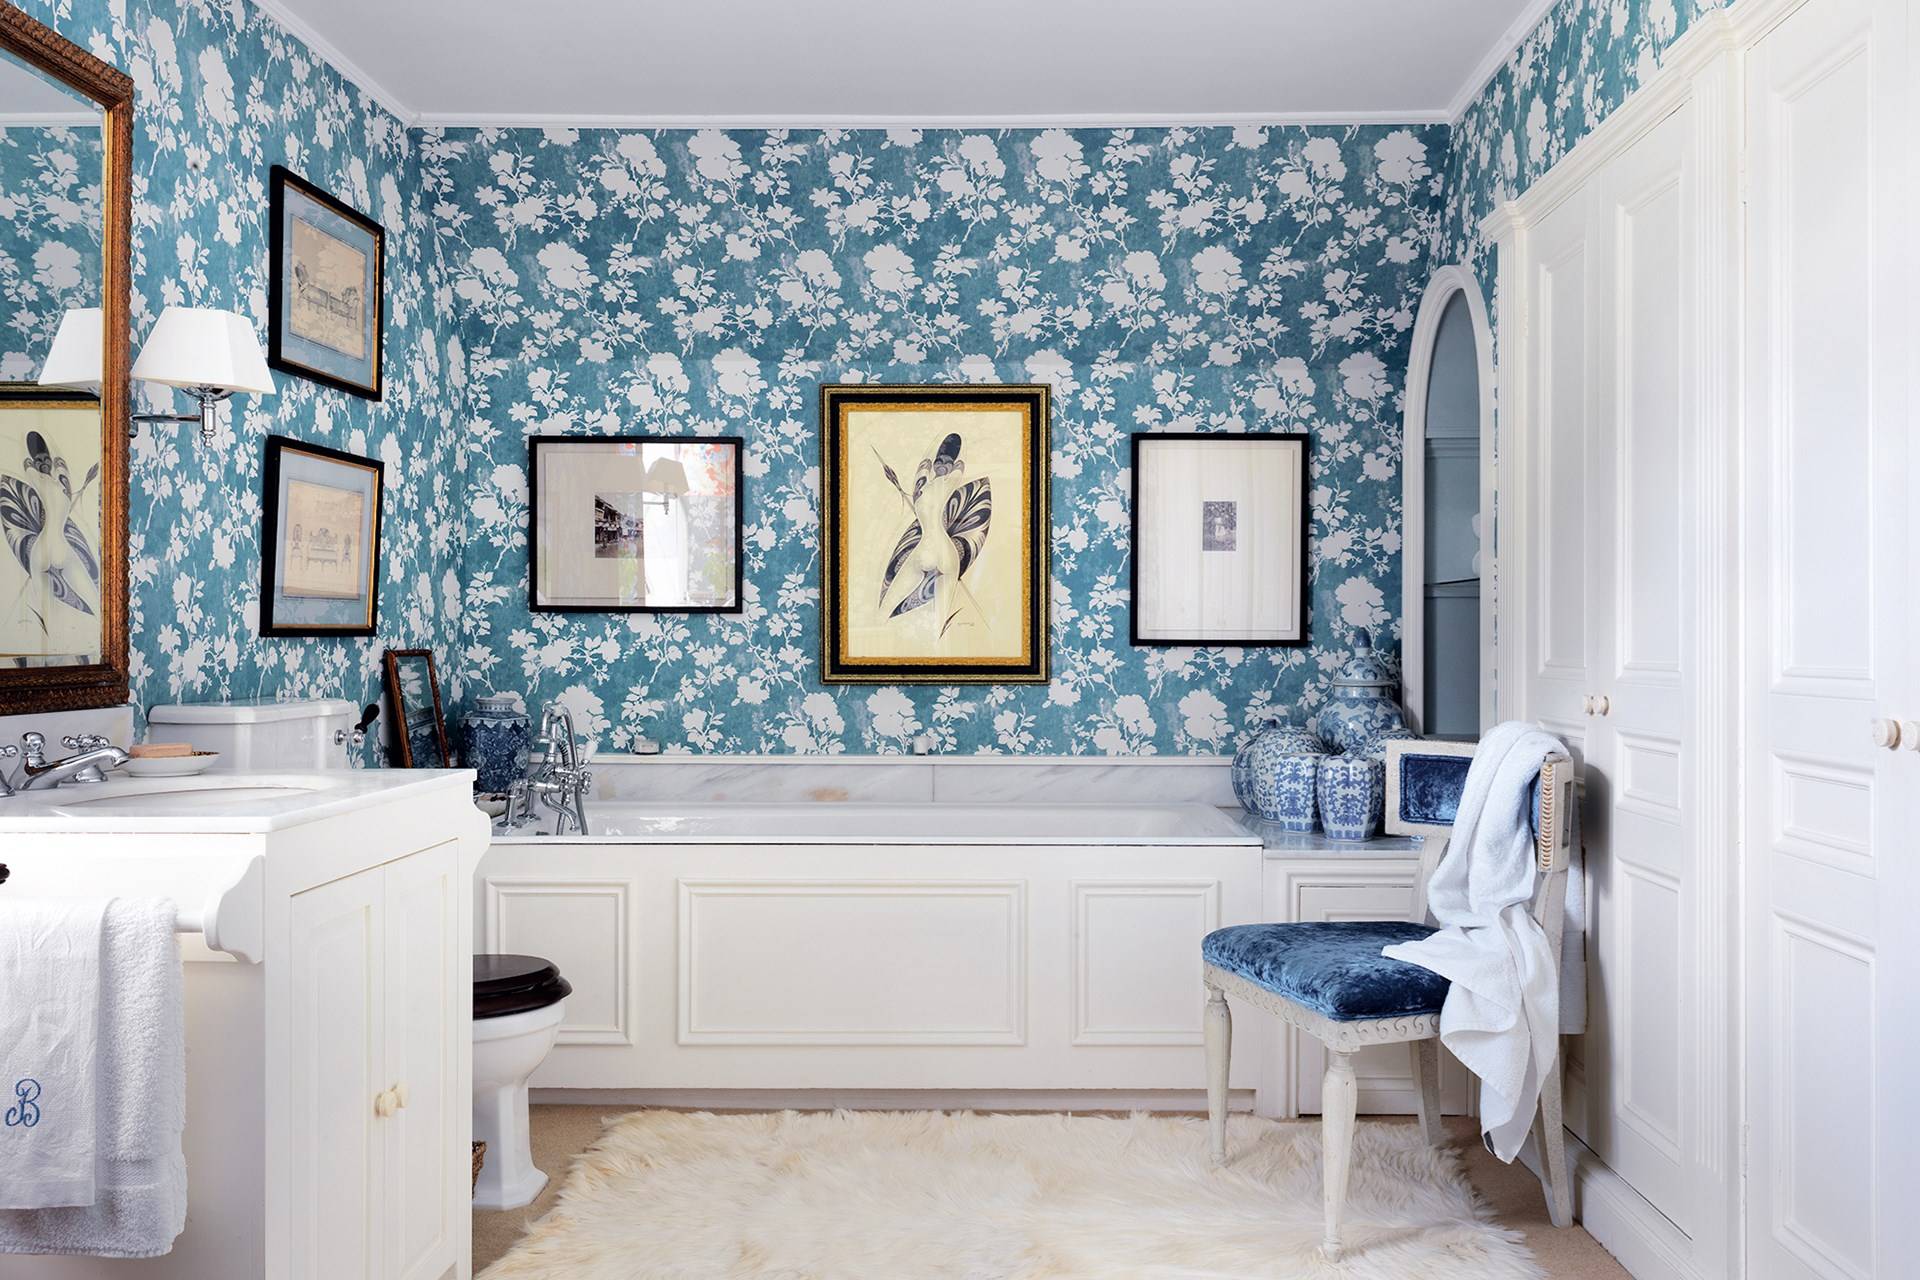 Bathroom Wallpaper - Check How to Use Wallpaper in a Bathroom